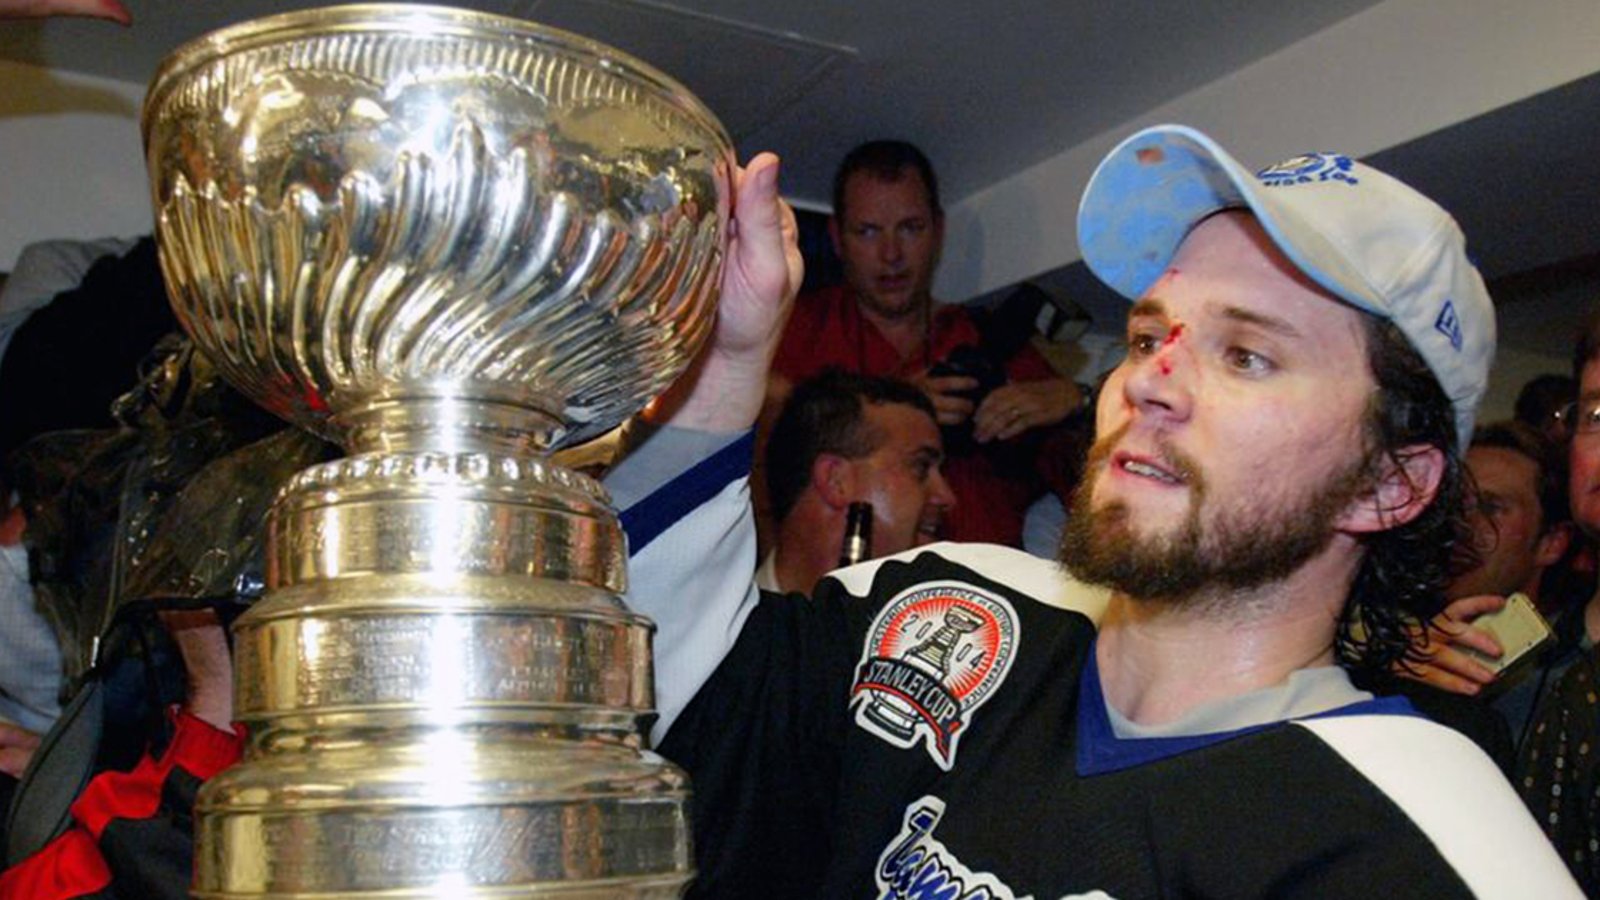 ICYMI: Hall of Famer Martin St. Louis hired by NHL team